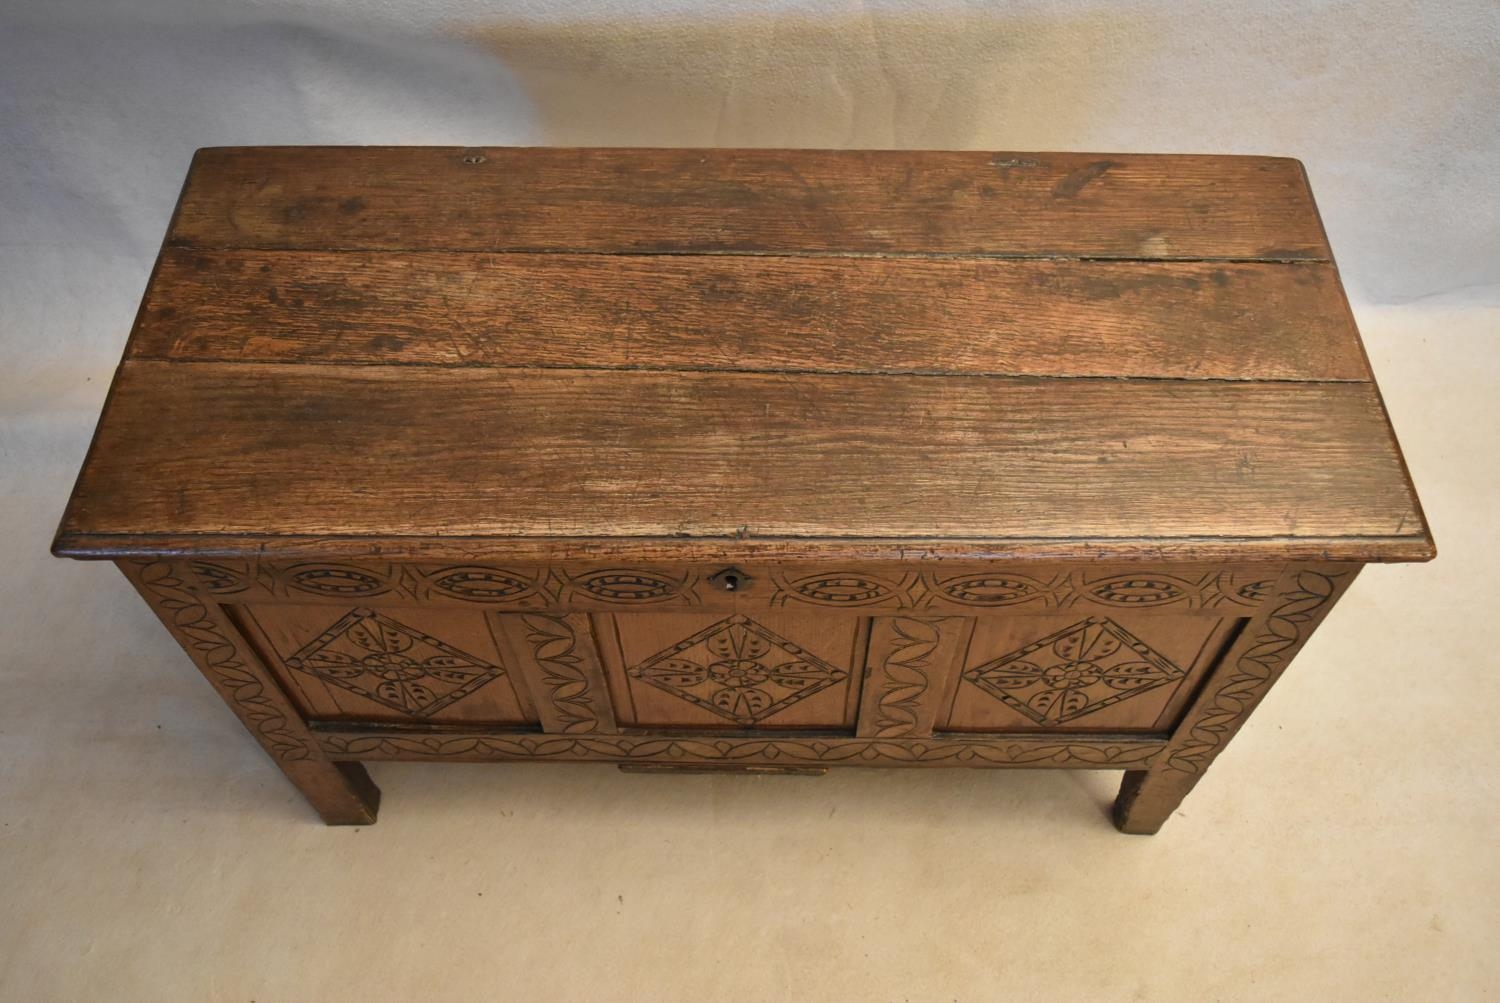 An 18th century country oak coffer with its original hinges and lozenge carved panels raised on - Image 3 of 10